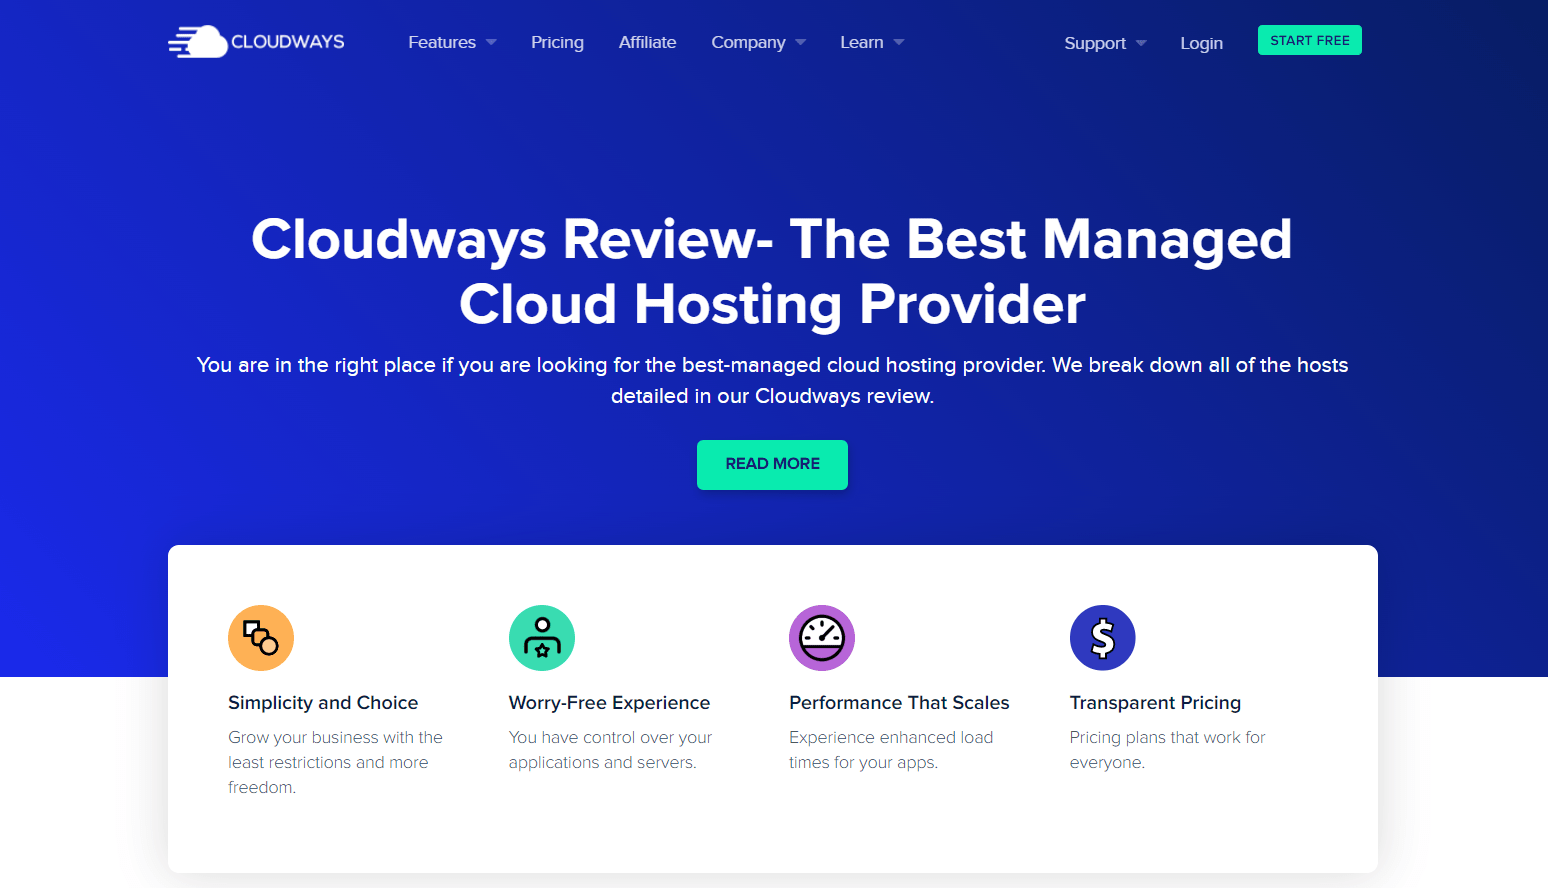 Cloudways Review- The Best Managed Cloud Hosting Provider